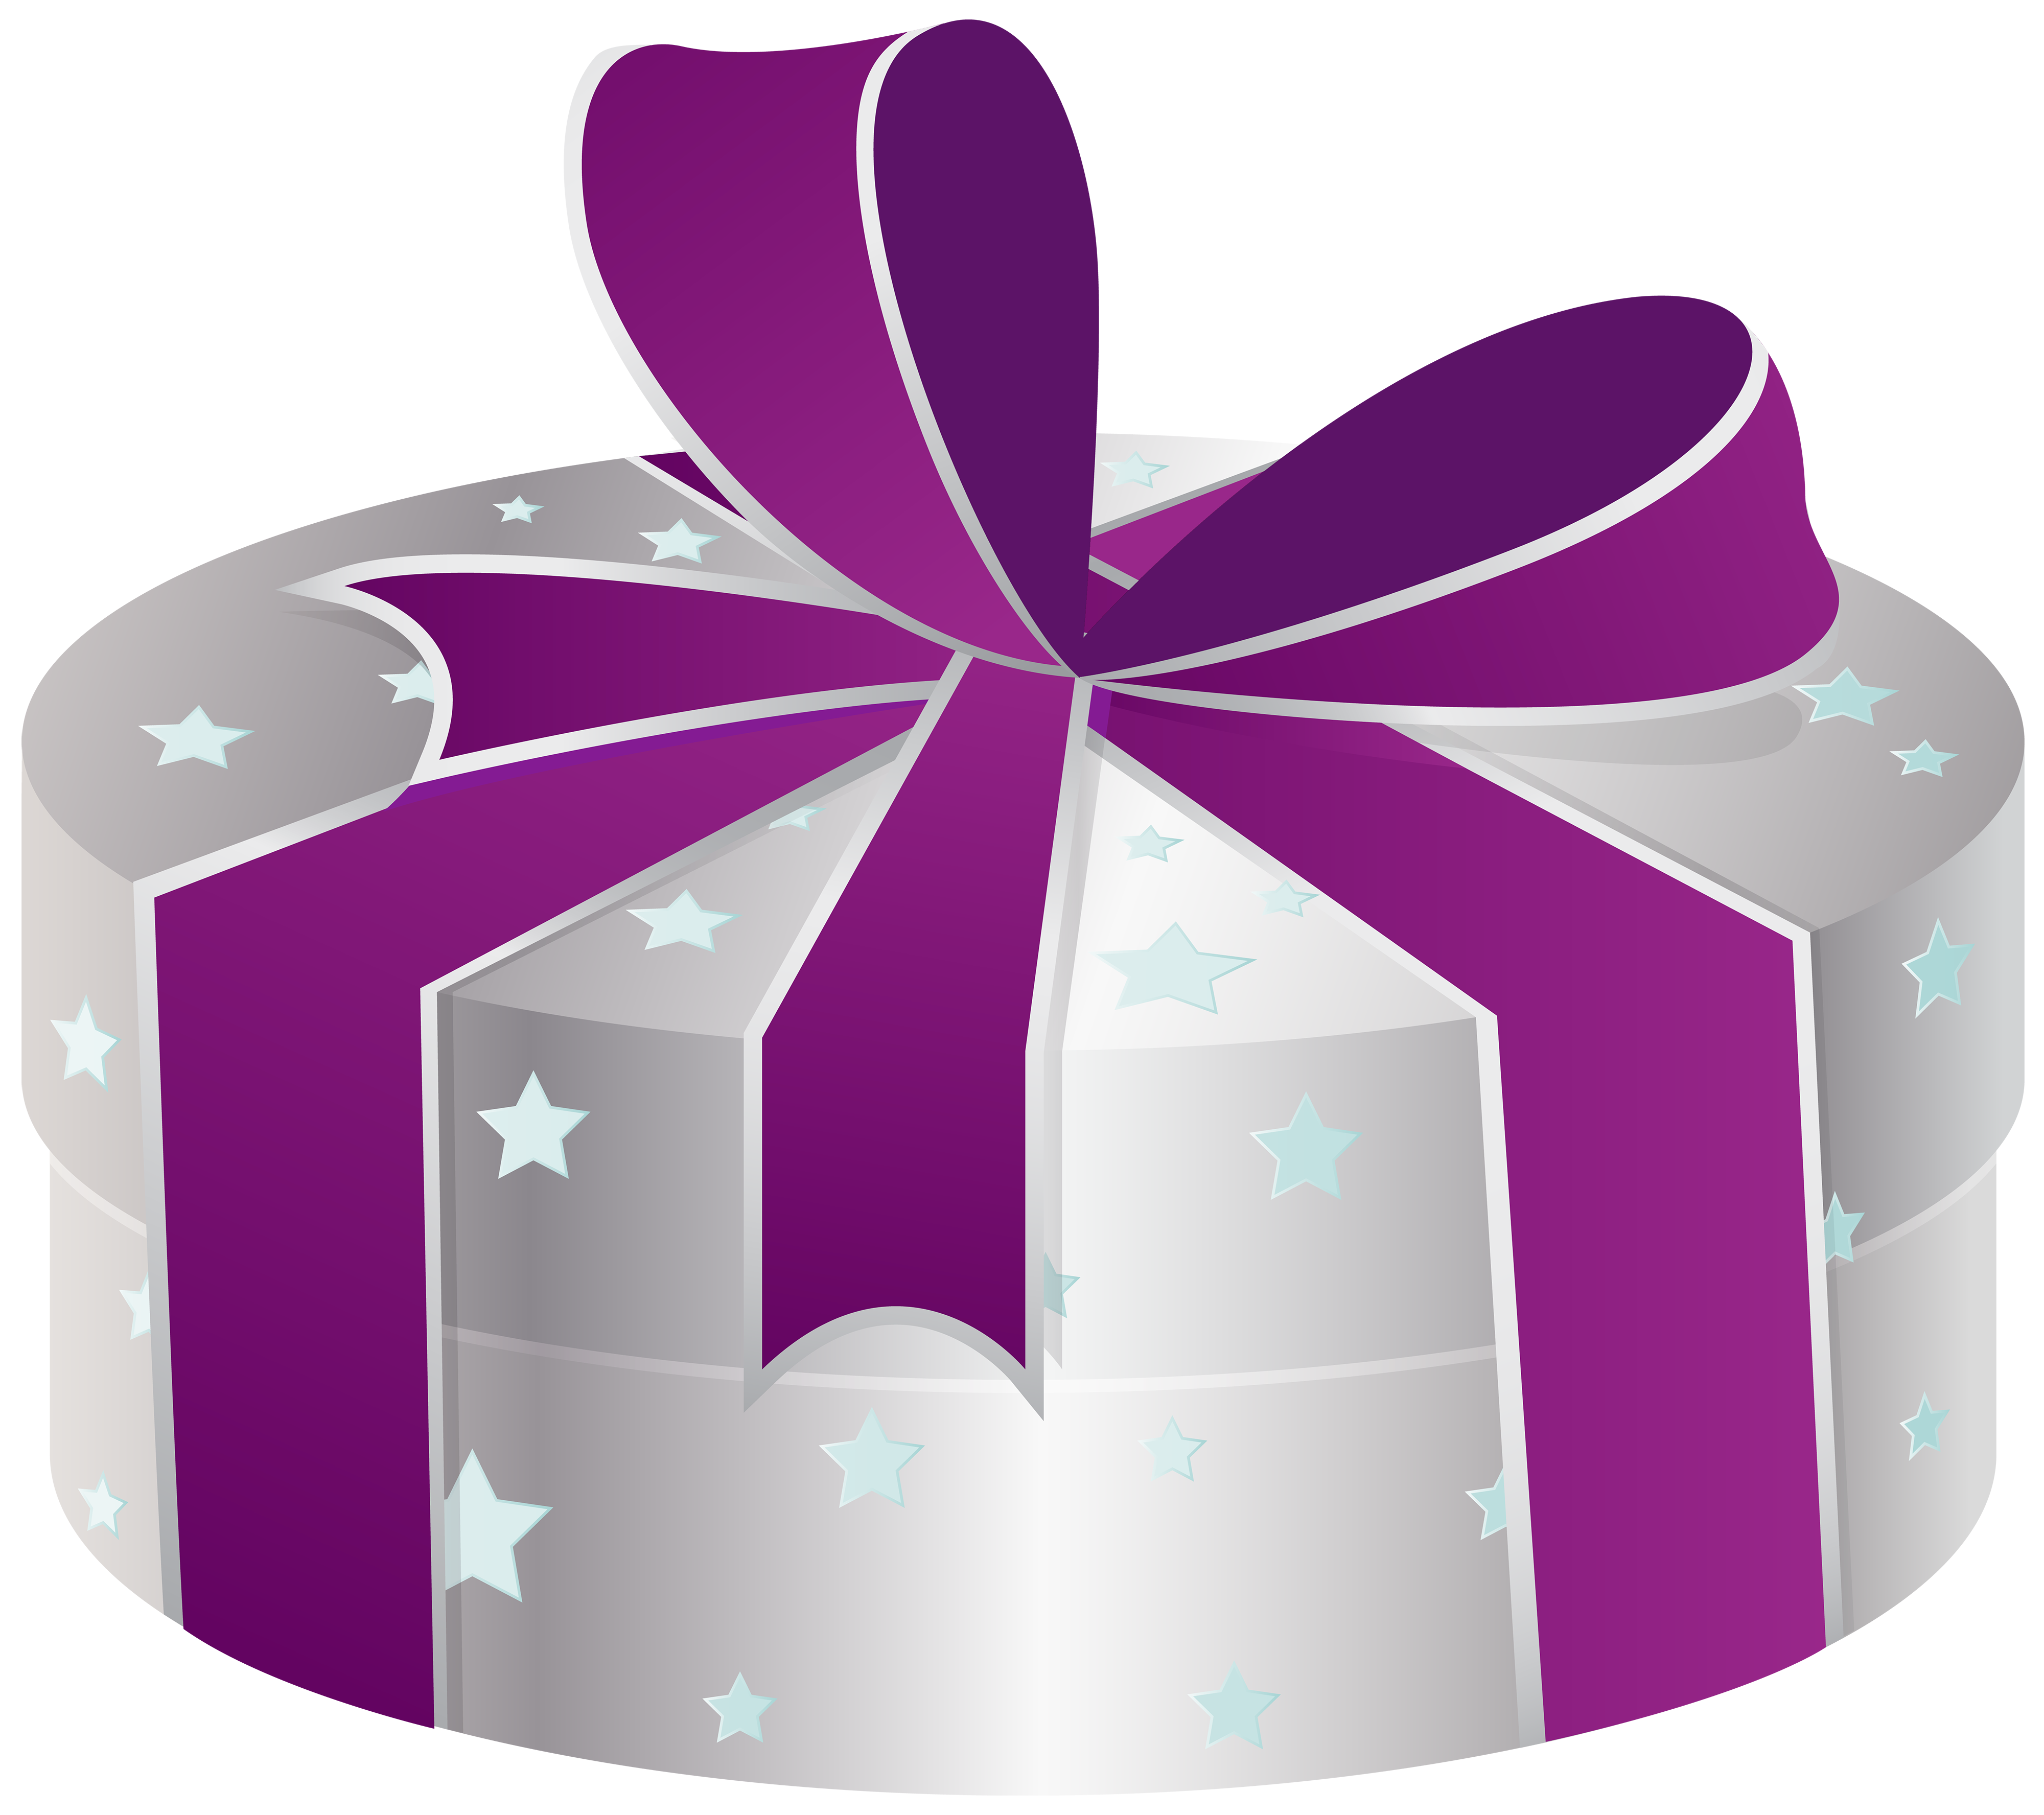 free clipart images gift boxes - photo #33